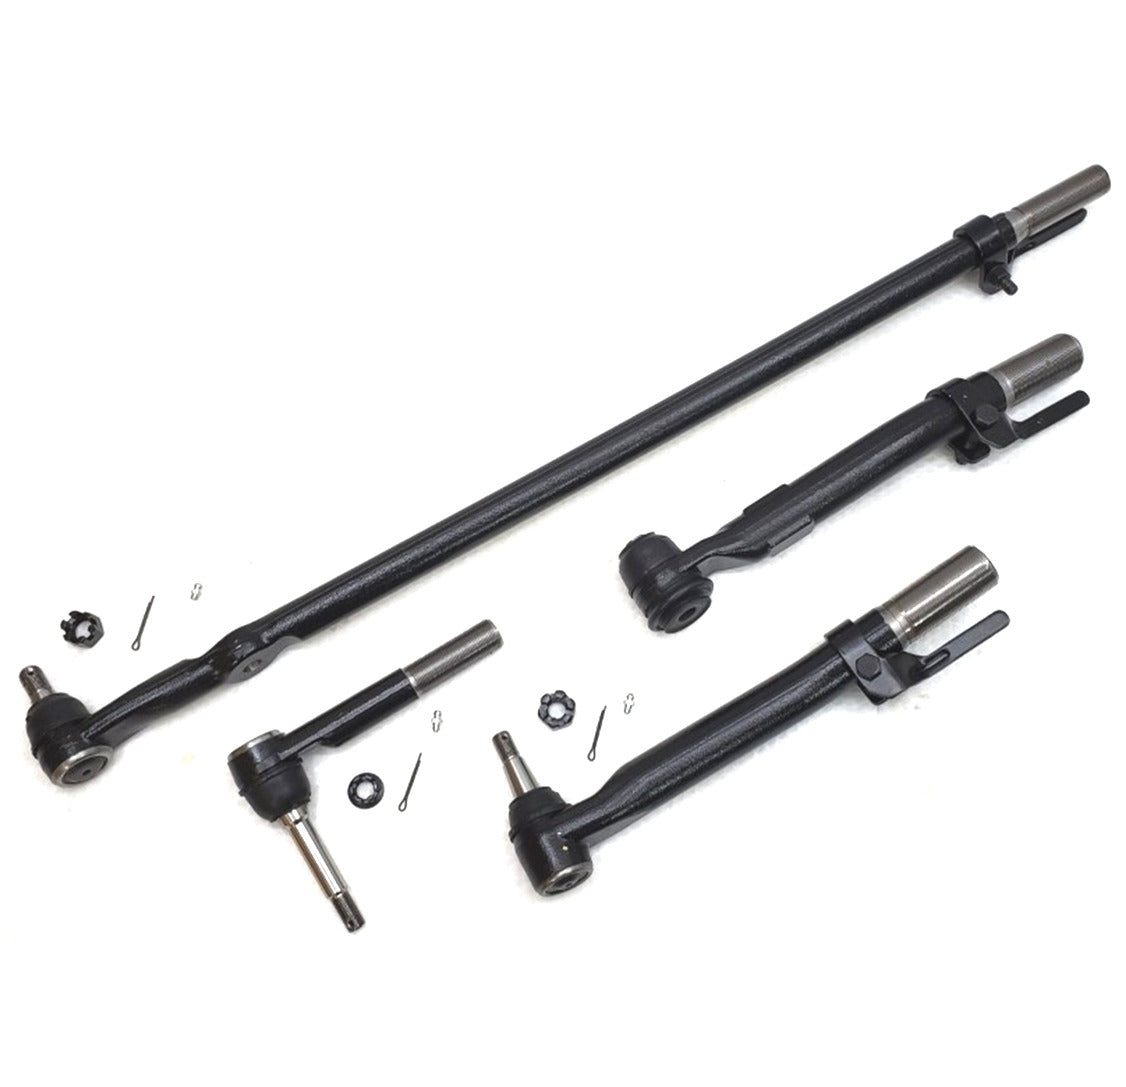 HD Drag Link Tie Rod Steering Kit for 2011-2016 Ford F450, F550 Super Duty 4x4